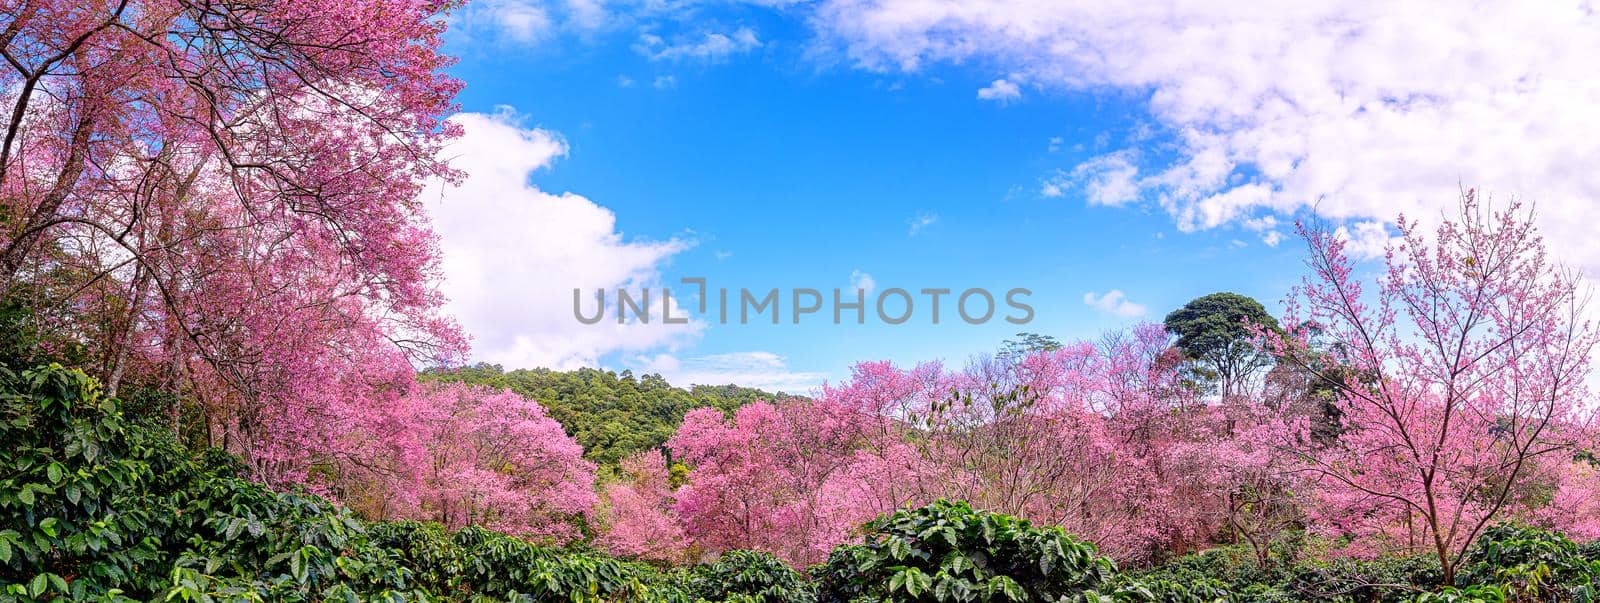 Blossom of Wild Himalayan Cherry (Prunus cerasoides) or Giant tiger flower. by NuwatPhoto